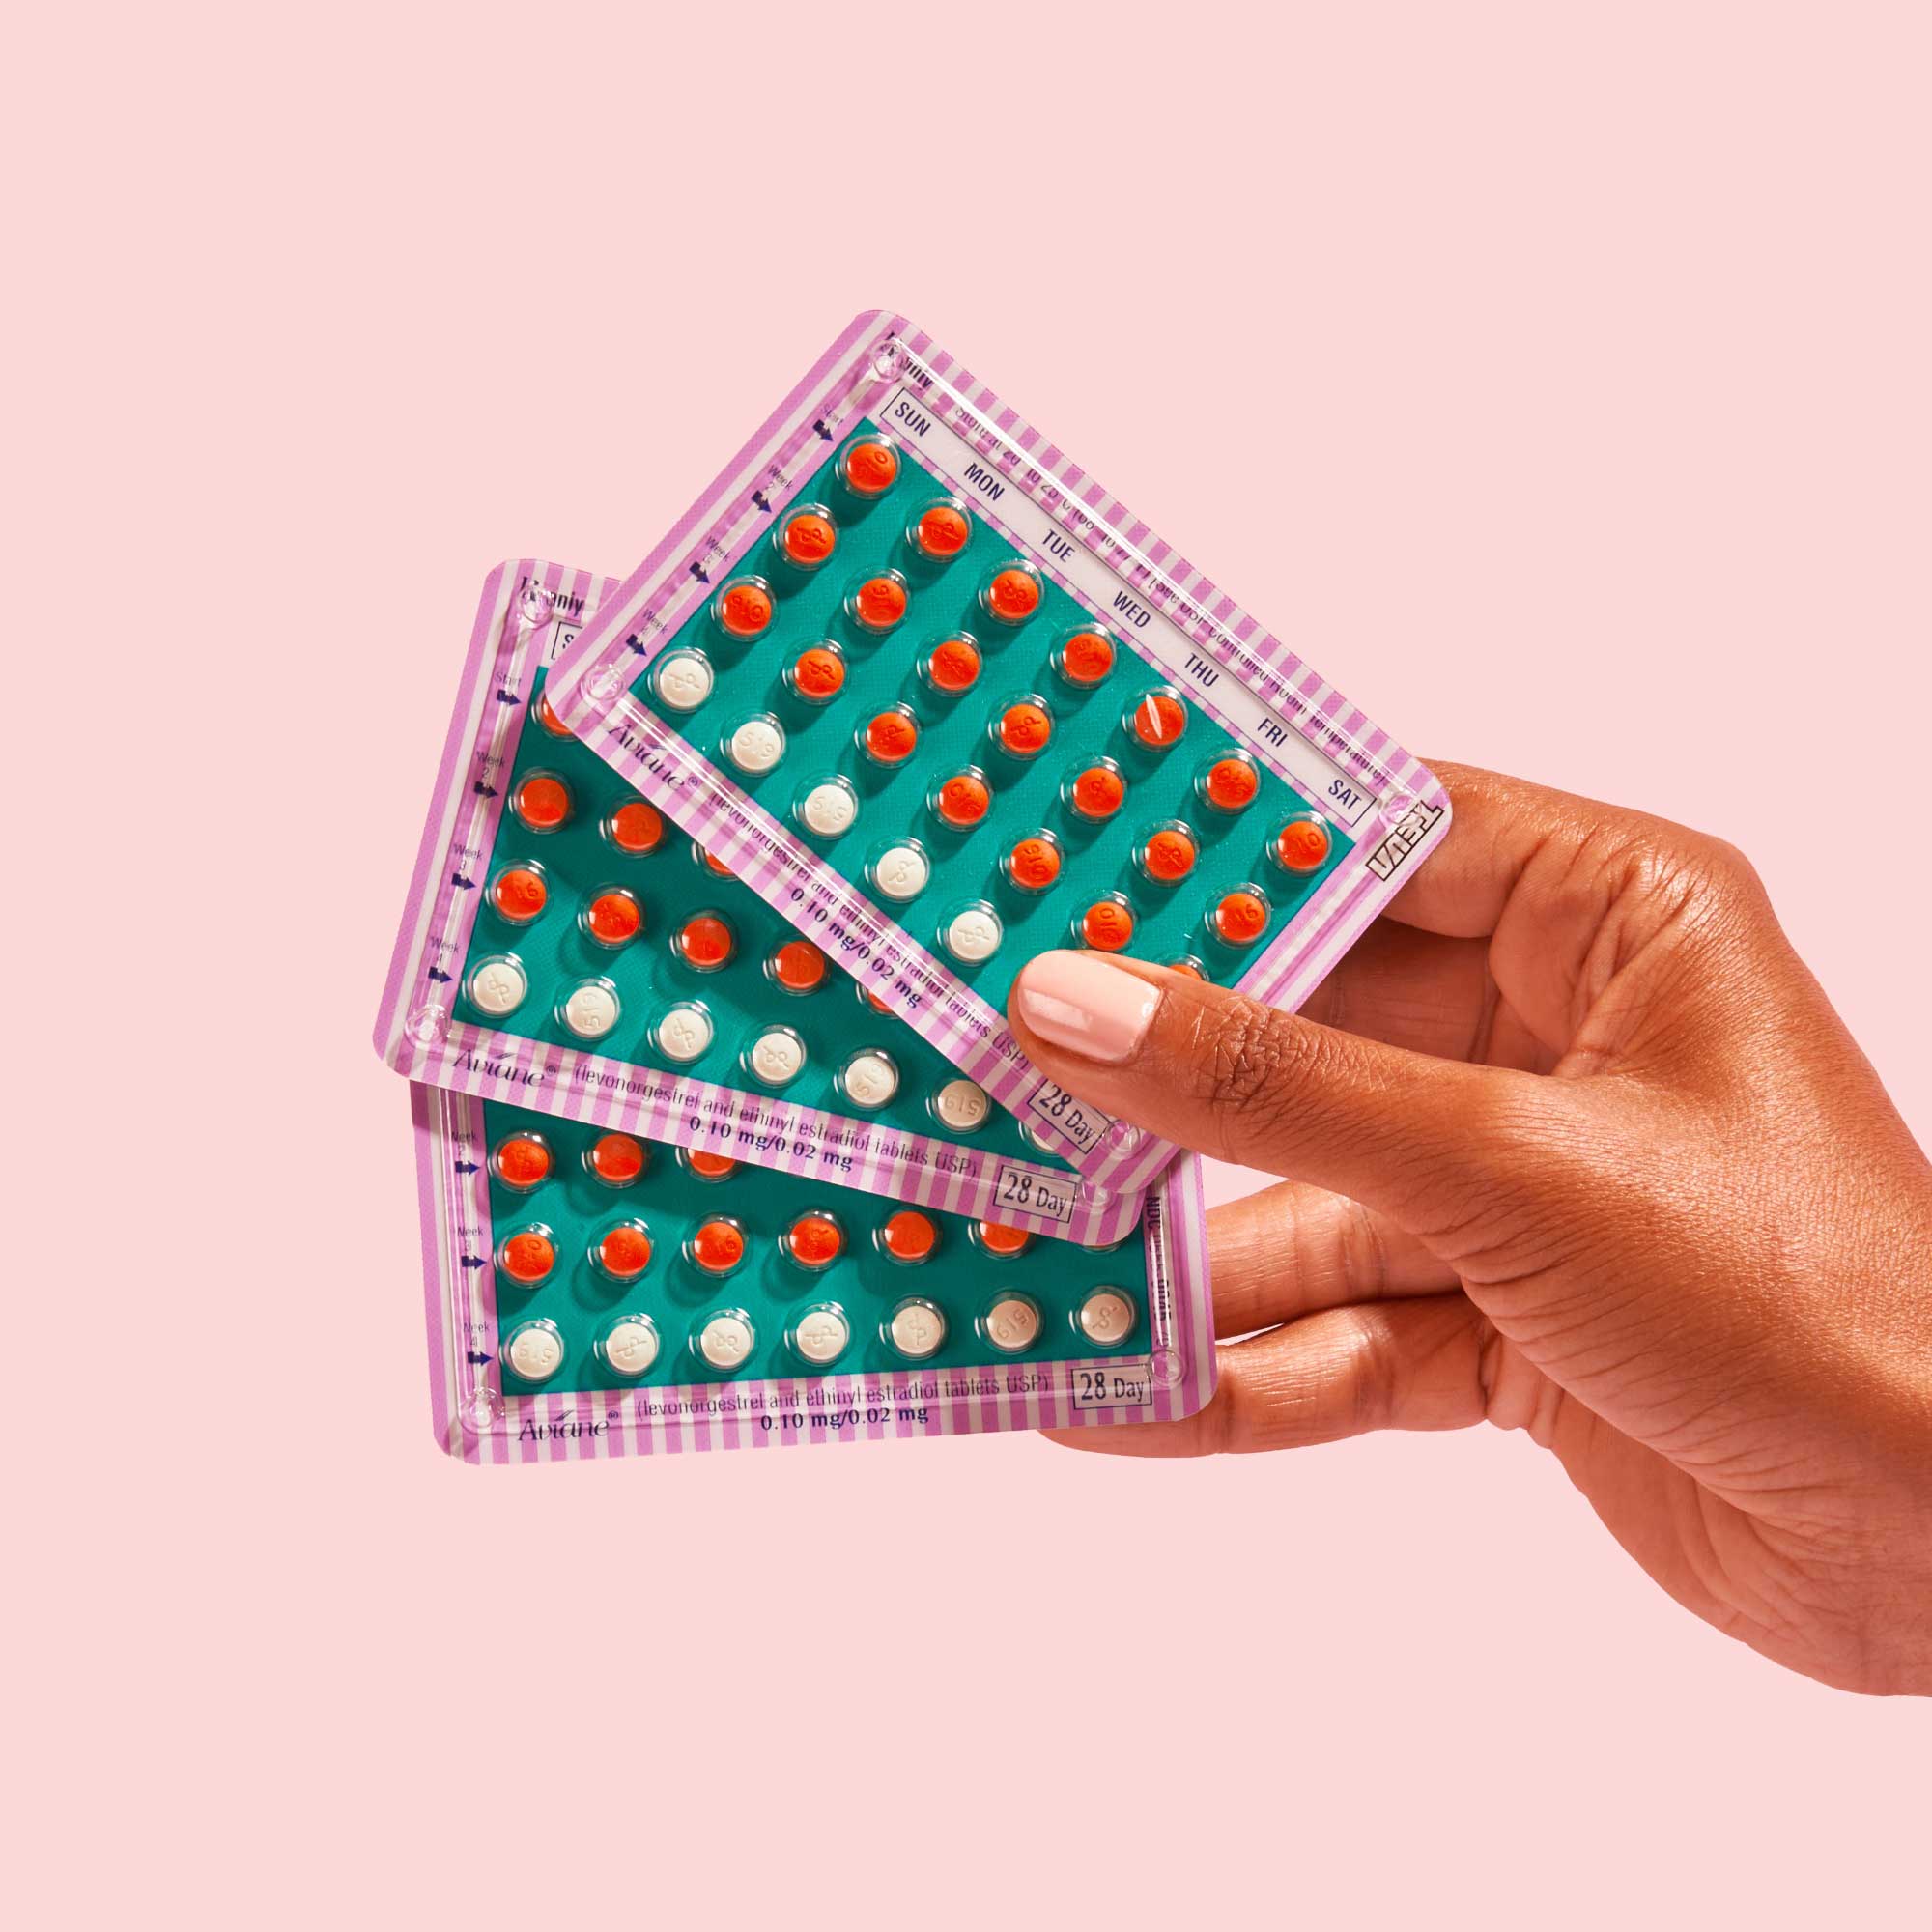 A woman's hand holding 3 birth control pill packets in front of a pink background